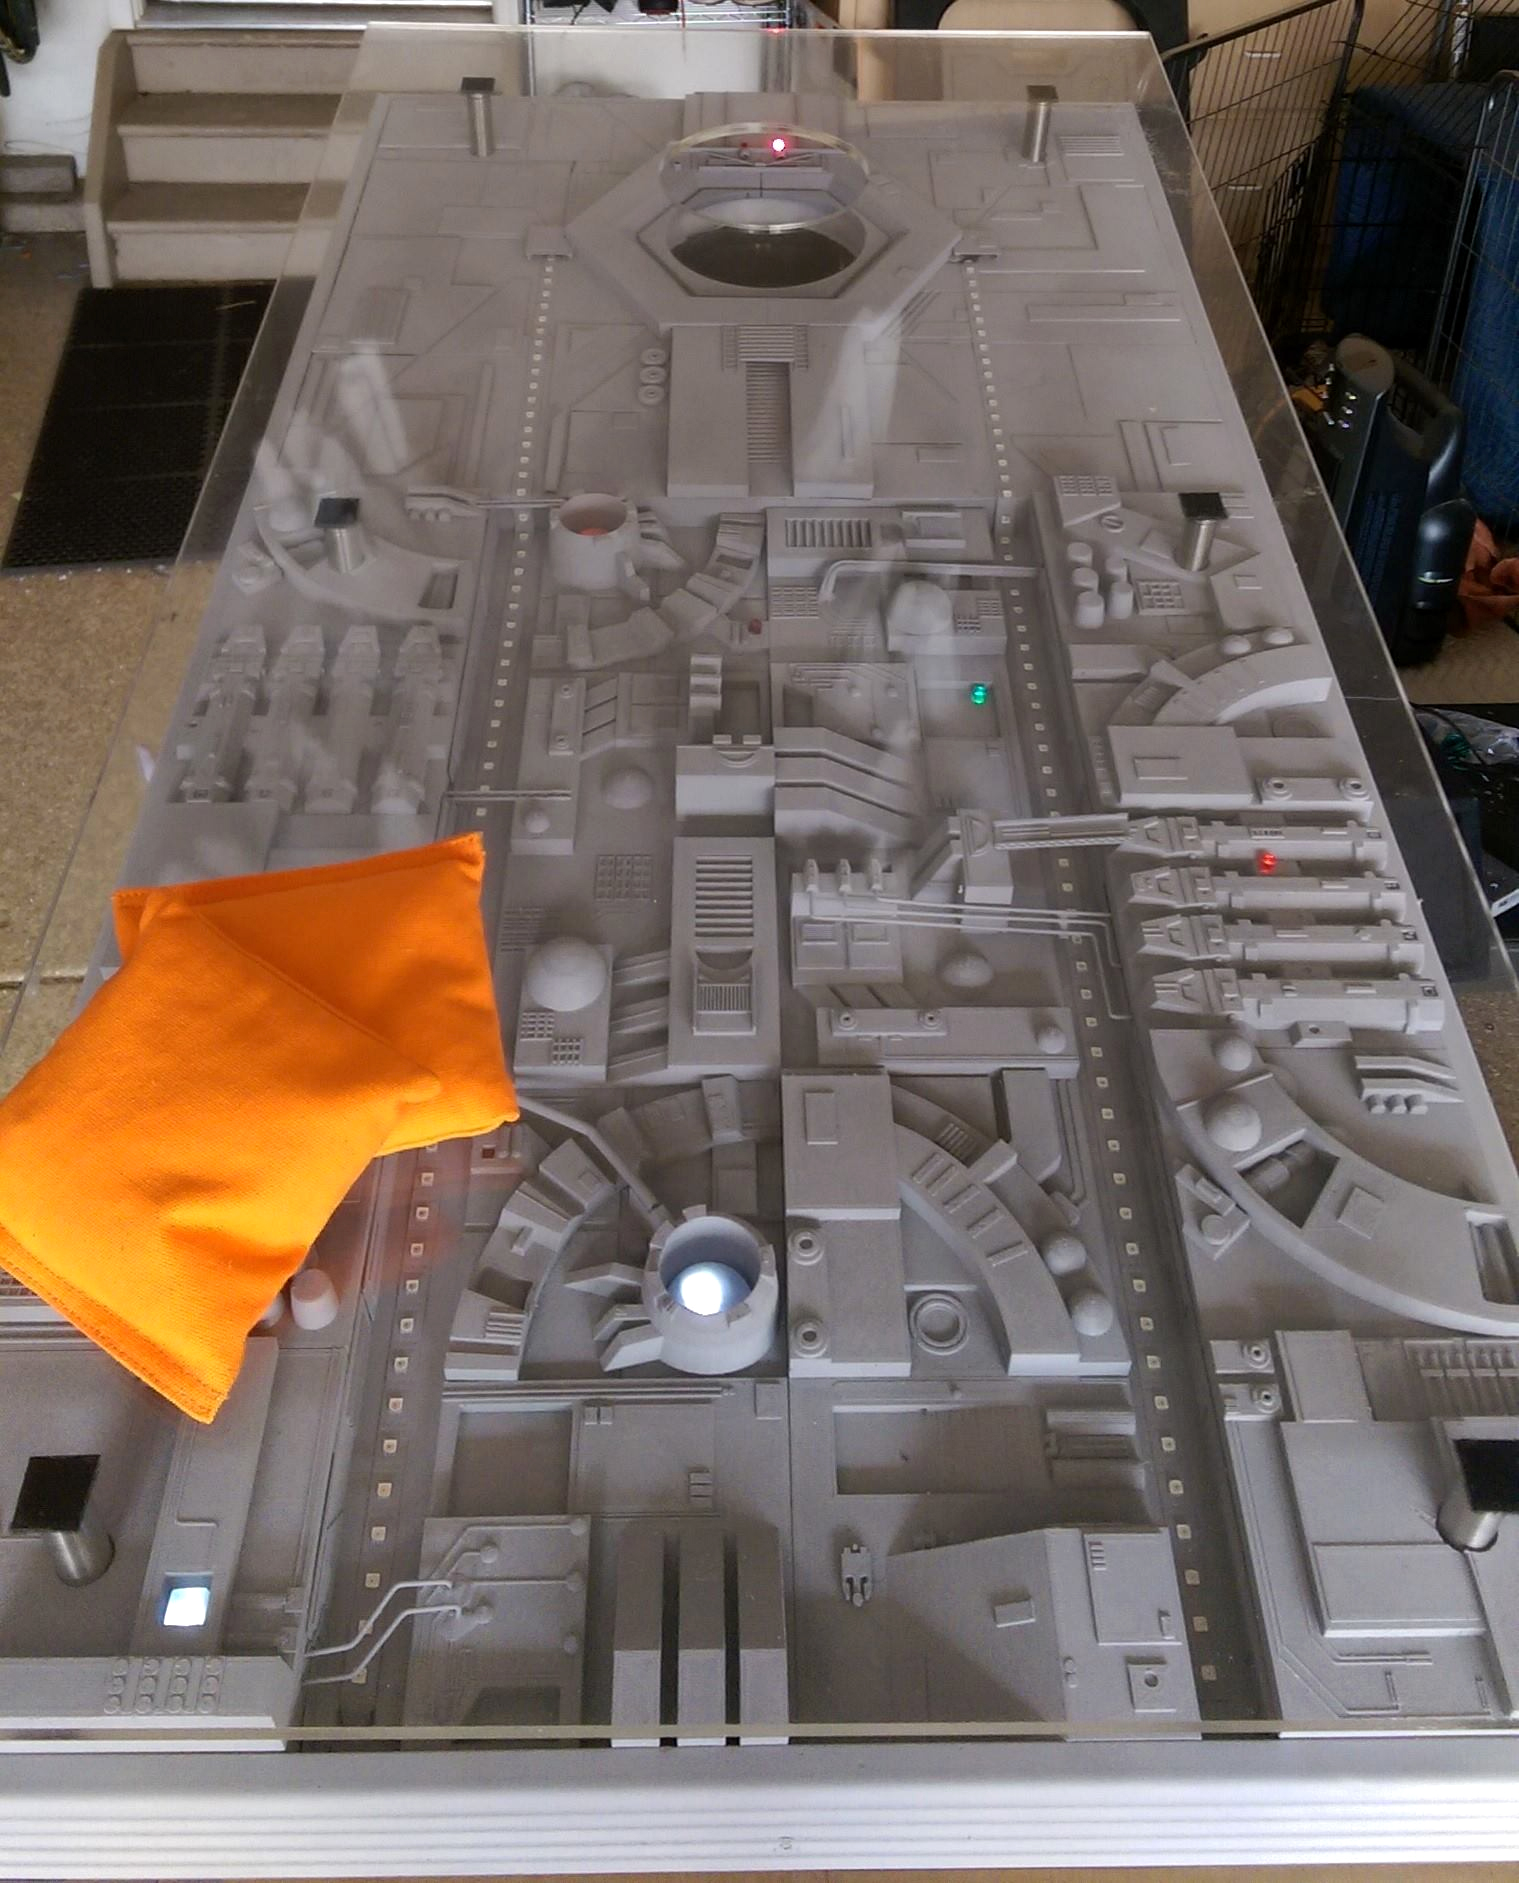 Every Skywalker Family Reunion Needs This Amazing Death Star Cornhole Game